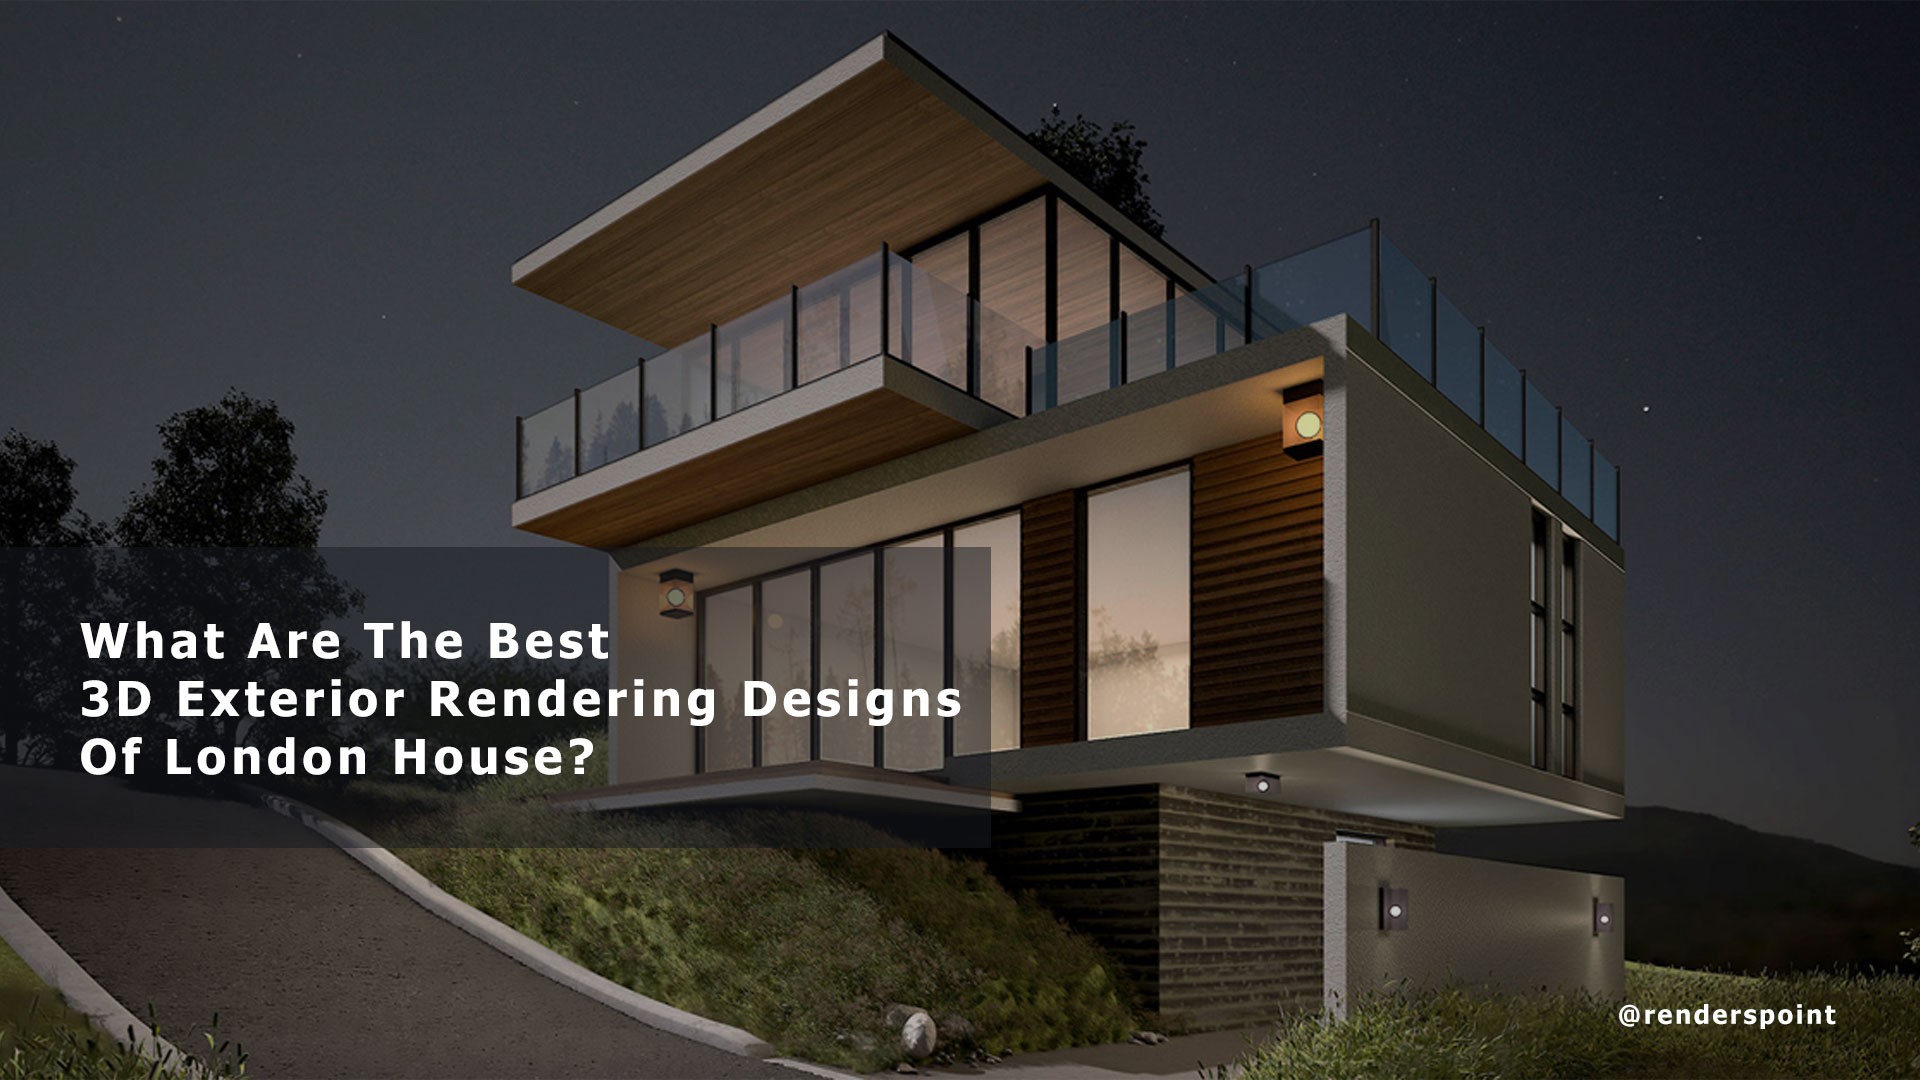 What are the best 3D exterior rendering Designs of London House?